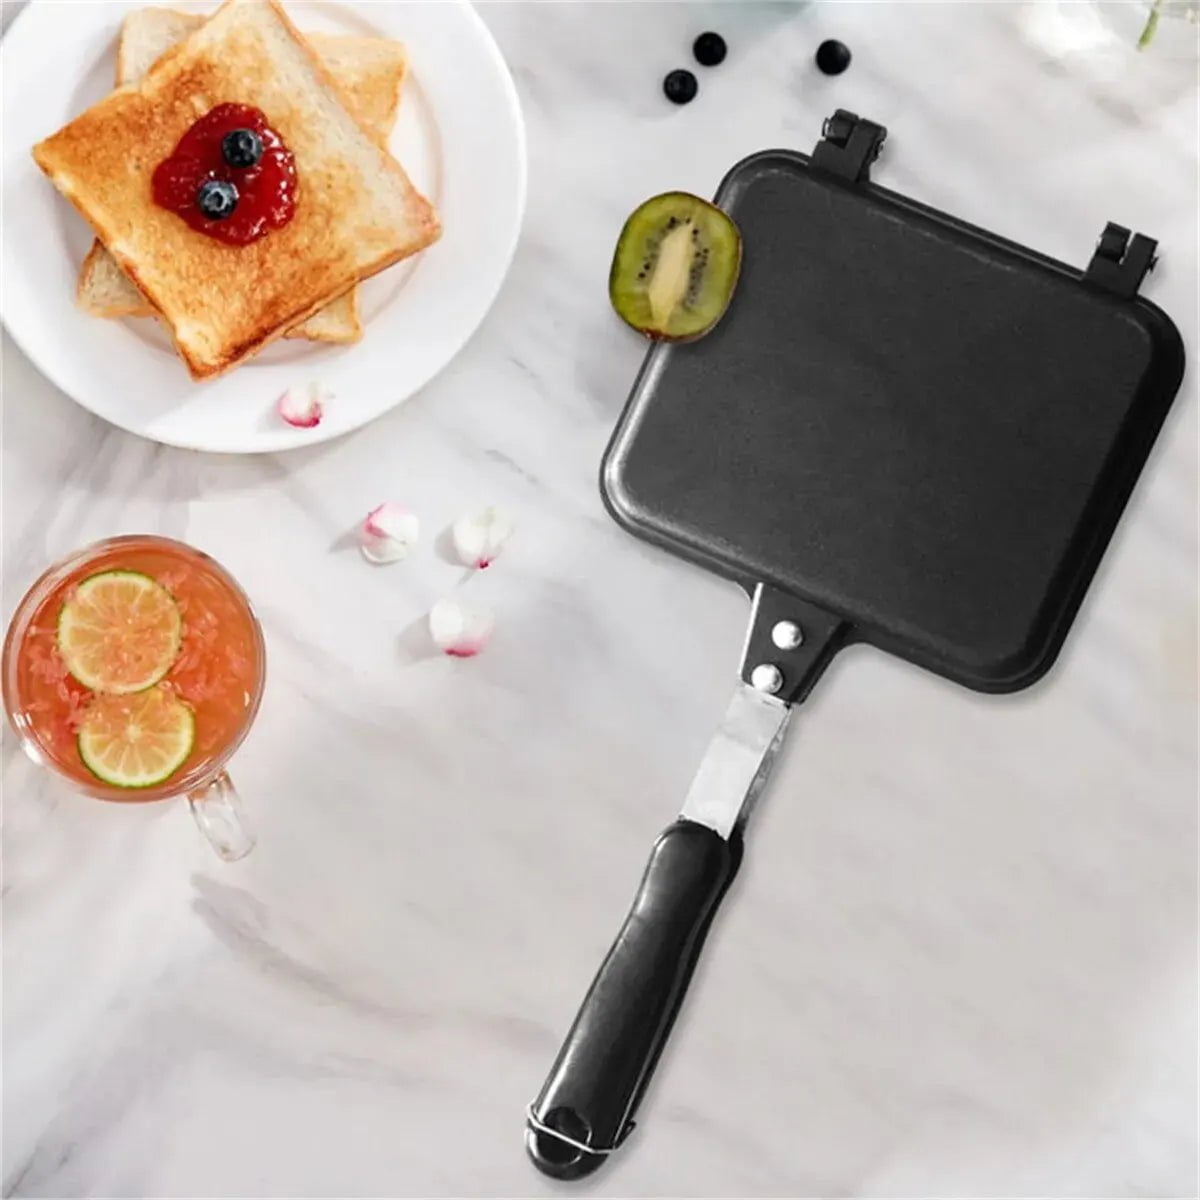 Double-Sided Non-Stick Grilled Sandwich and Panini Maker Pan with Handle - Aluminum Flip Pan, Sandwich Maker Black